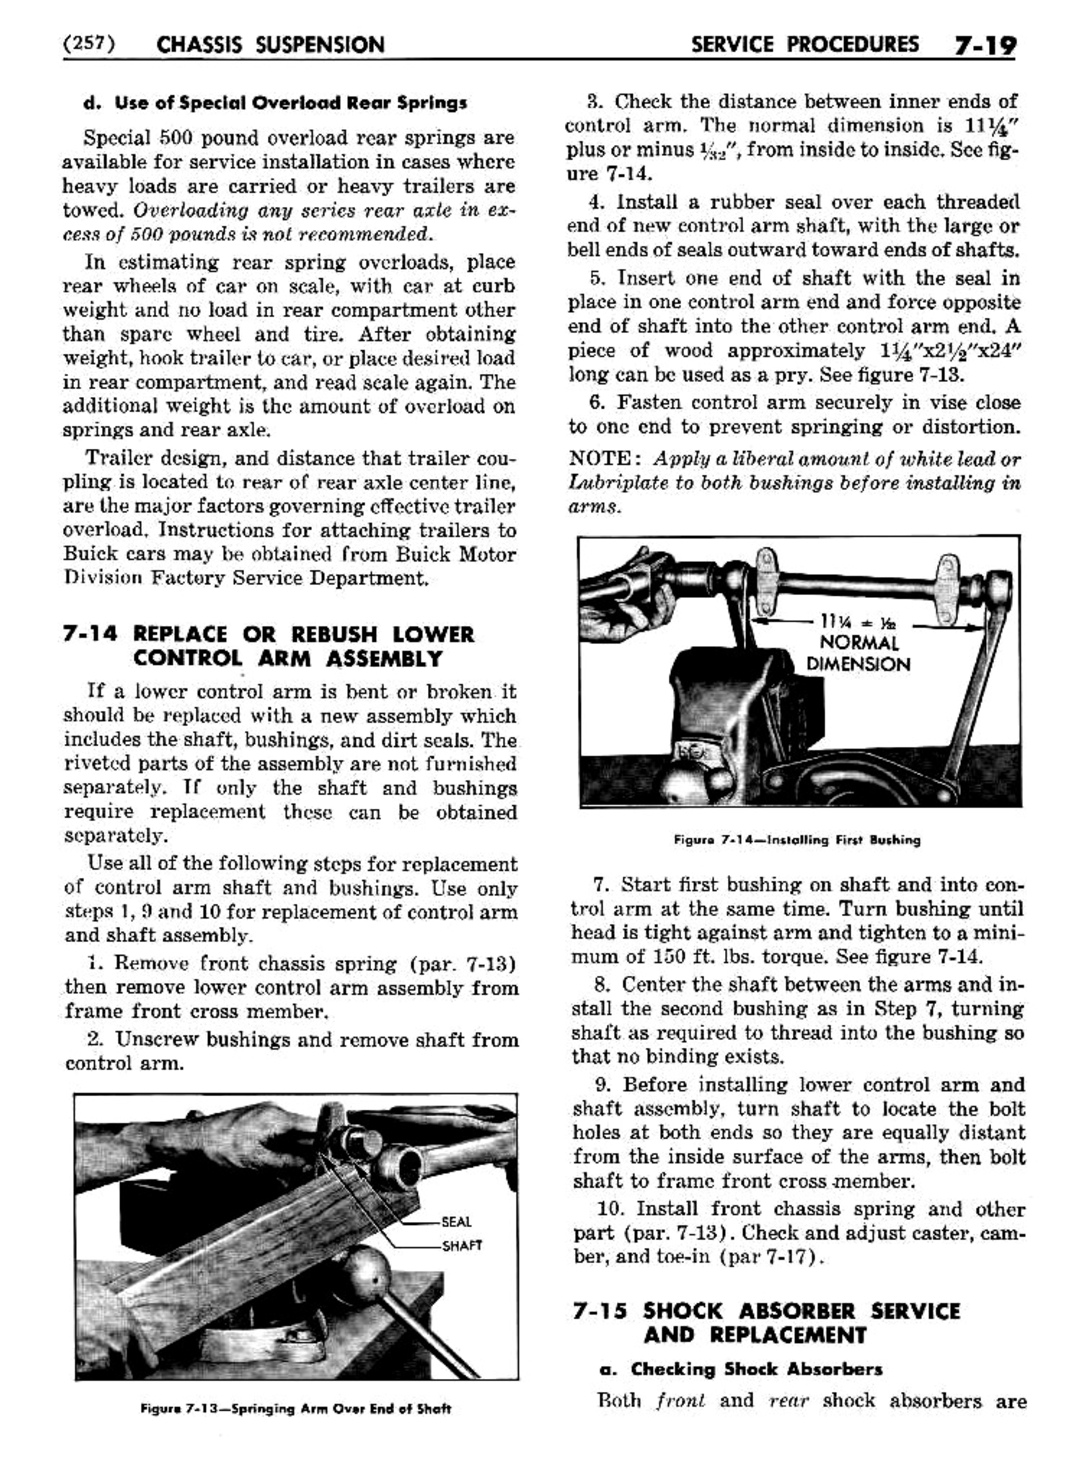 n_08 1956 Buick Shop Manual - Chassis Suspension-019-019.jpg